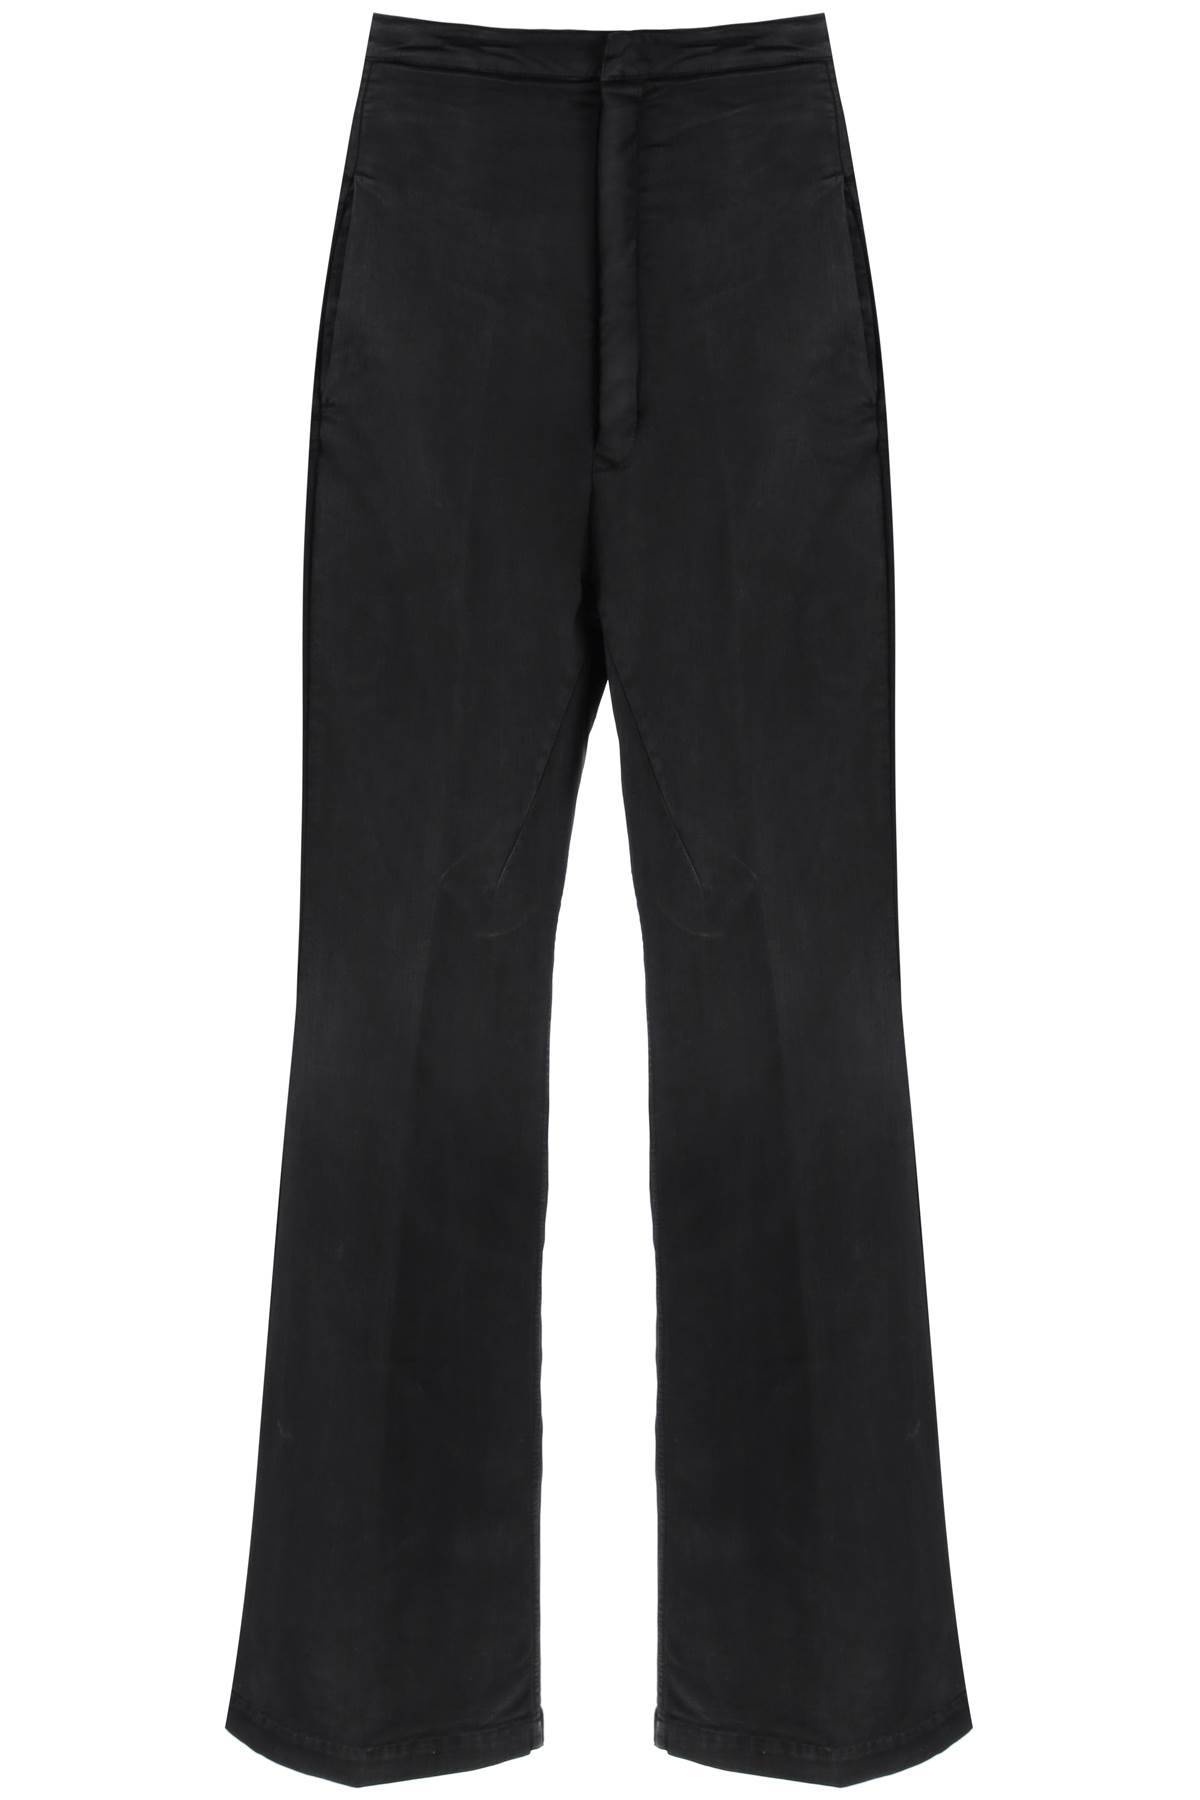 Rick Owens RICK OWENS high-waisted bootcut jeans with a